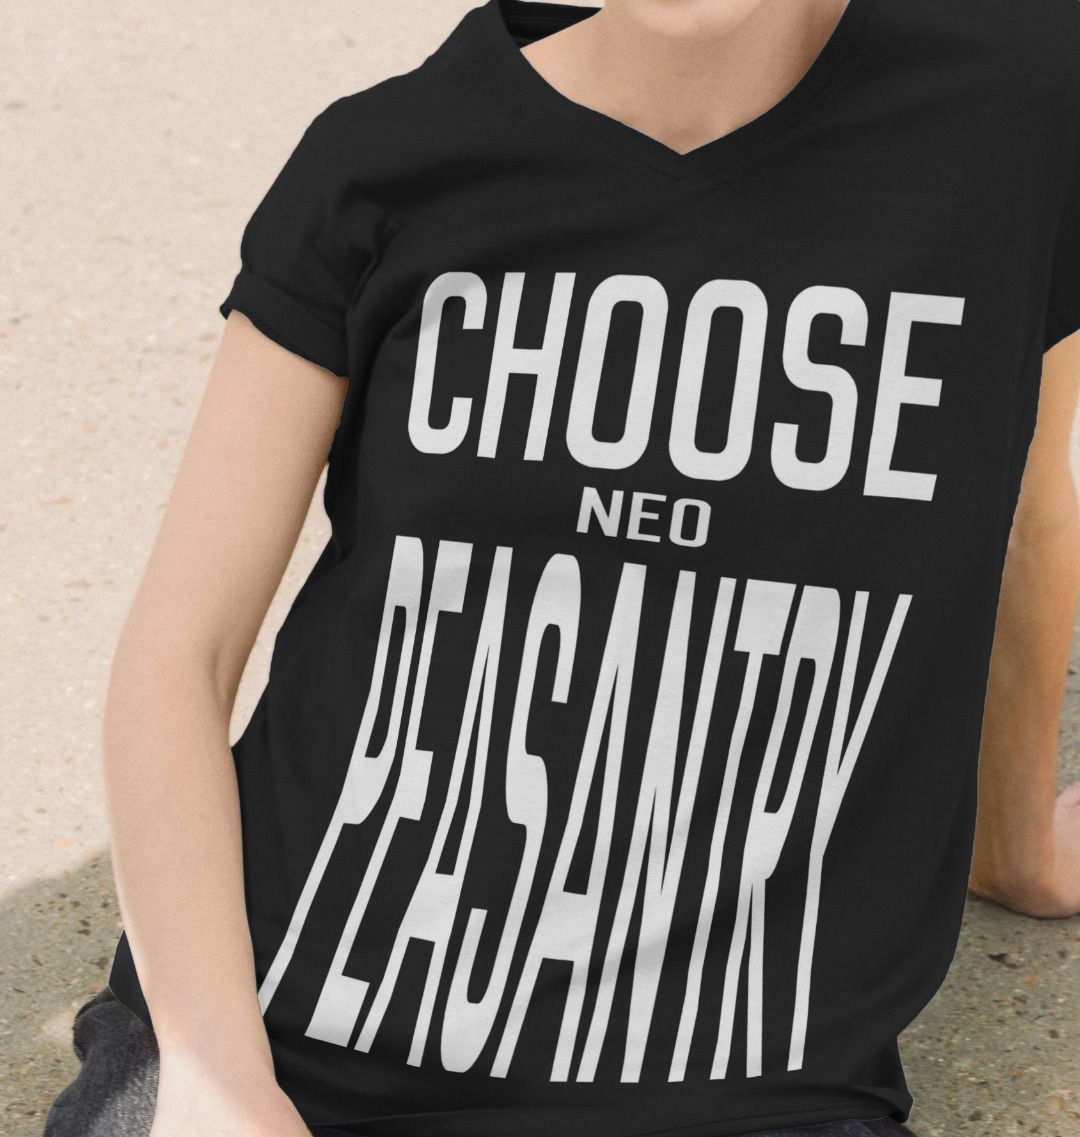 Choose Neo Peasantry womens fit V neck T-shirt